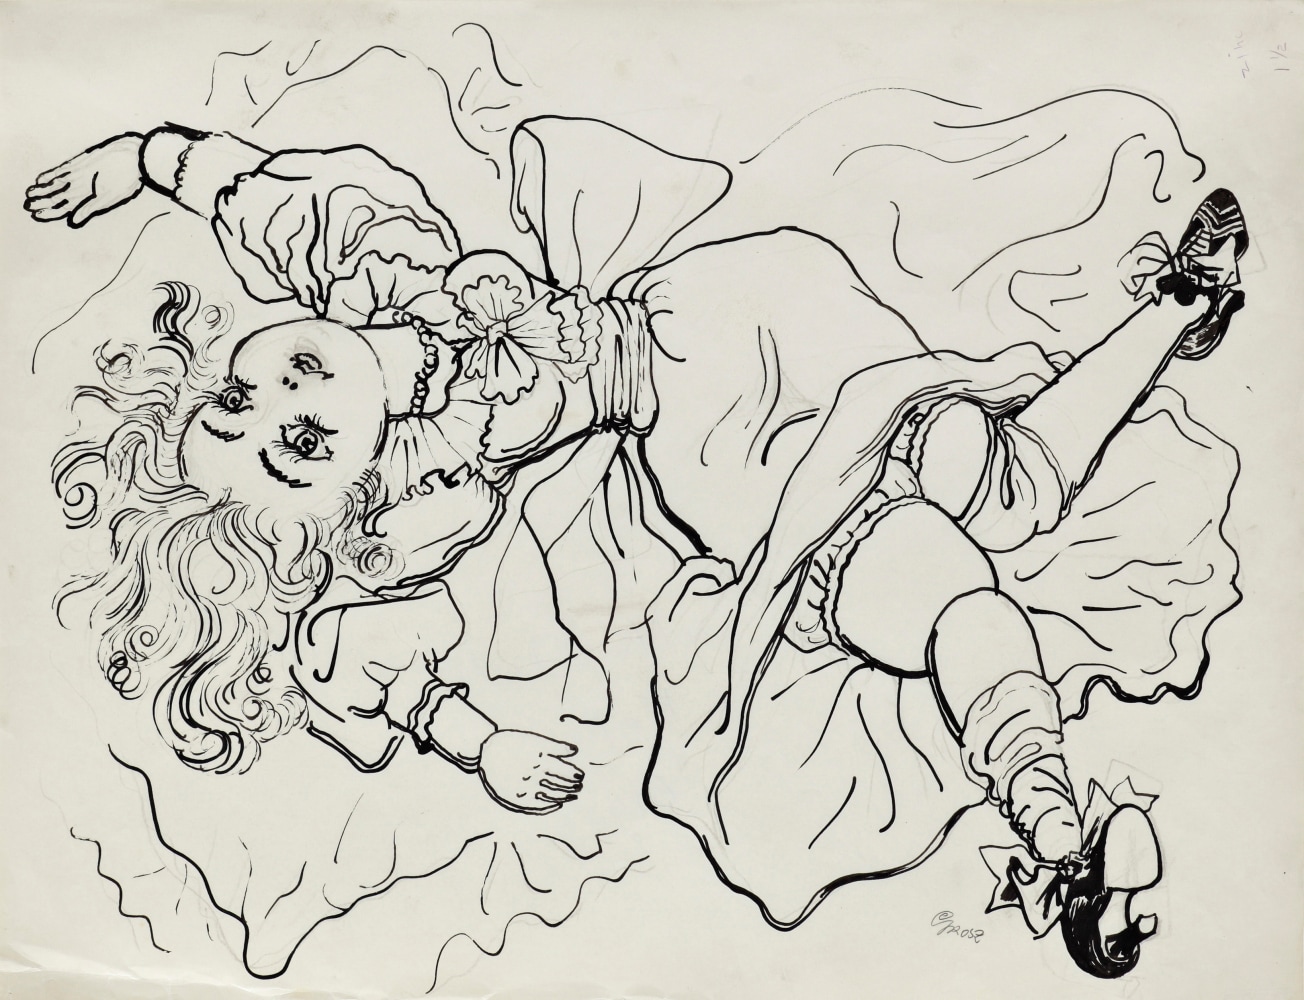 George&amp;nbsp;Grosz (1893&amp;ndash;1959)
The Silk Doll, 1937
Ink and chalk on paper
18 x 23 1/2&amp;nbsp;in. (46&amp;nbsp;x 59&amp;nbsp;cm)

&amp;nbsp;

Drawing for&amp;nbsp;Esquire, February 1937, p. 112, for Frank K. Kelly&amp;#39;s story of the same title.